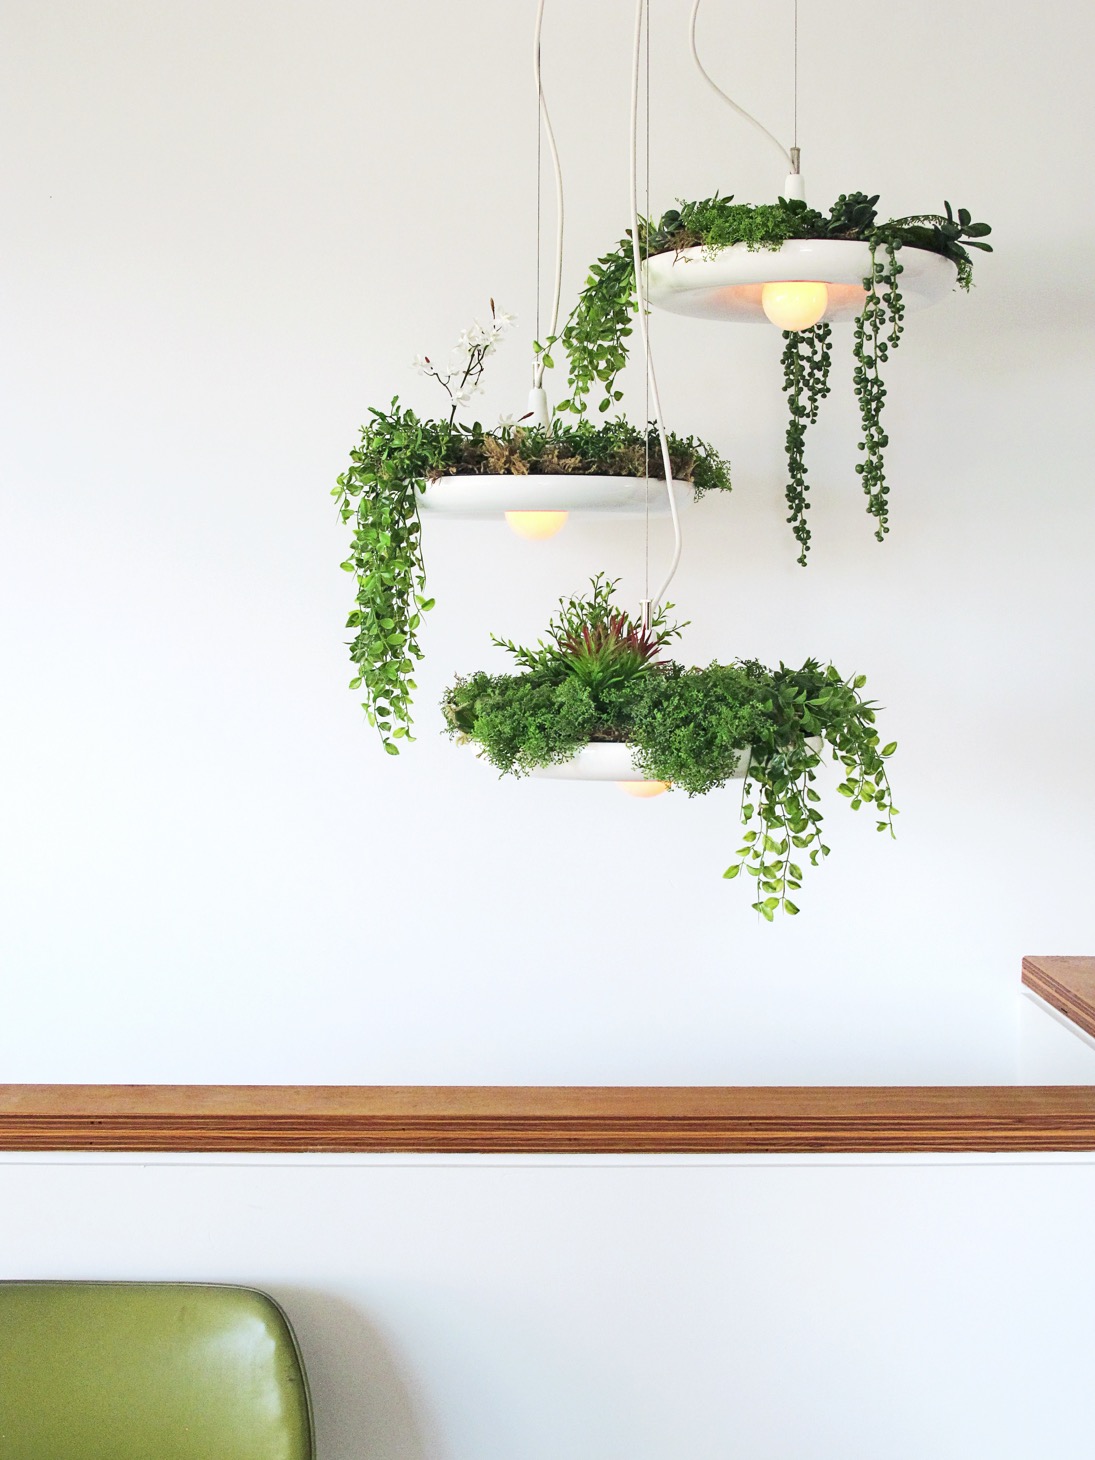 Object/Interface's Babylon pendant is a quirky way to introduce green into a tight space without cluttering it. Available as a single pendant or three light cluster. More #greenwall ideas on the RSD Blog.